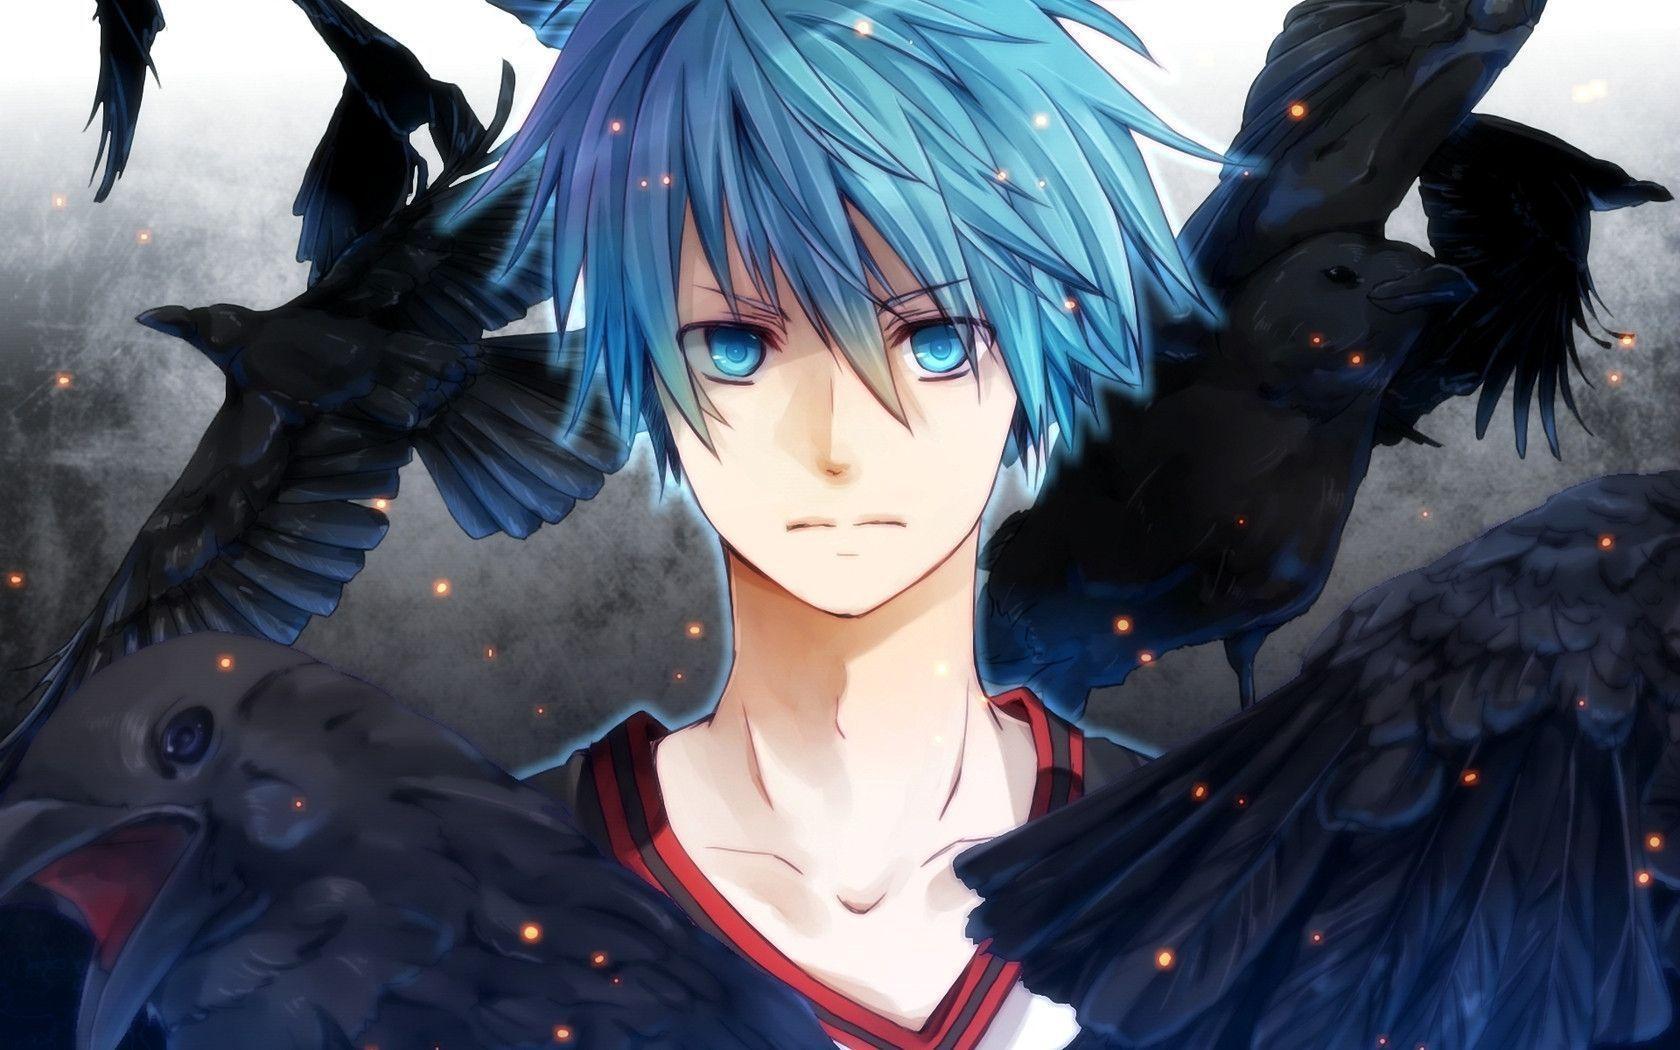 Anime male with blue hair digital illustration - wide 1